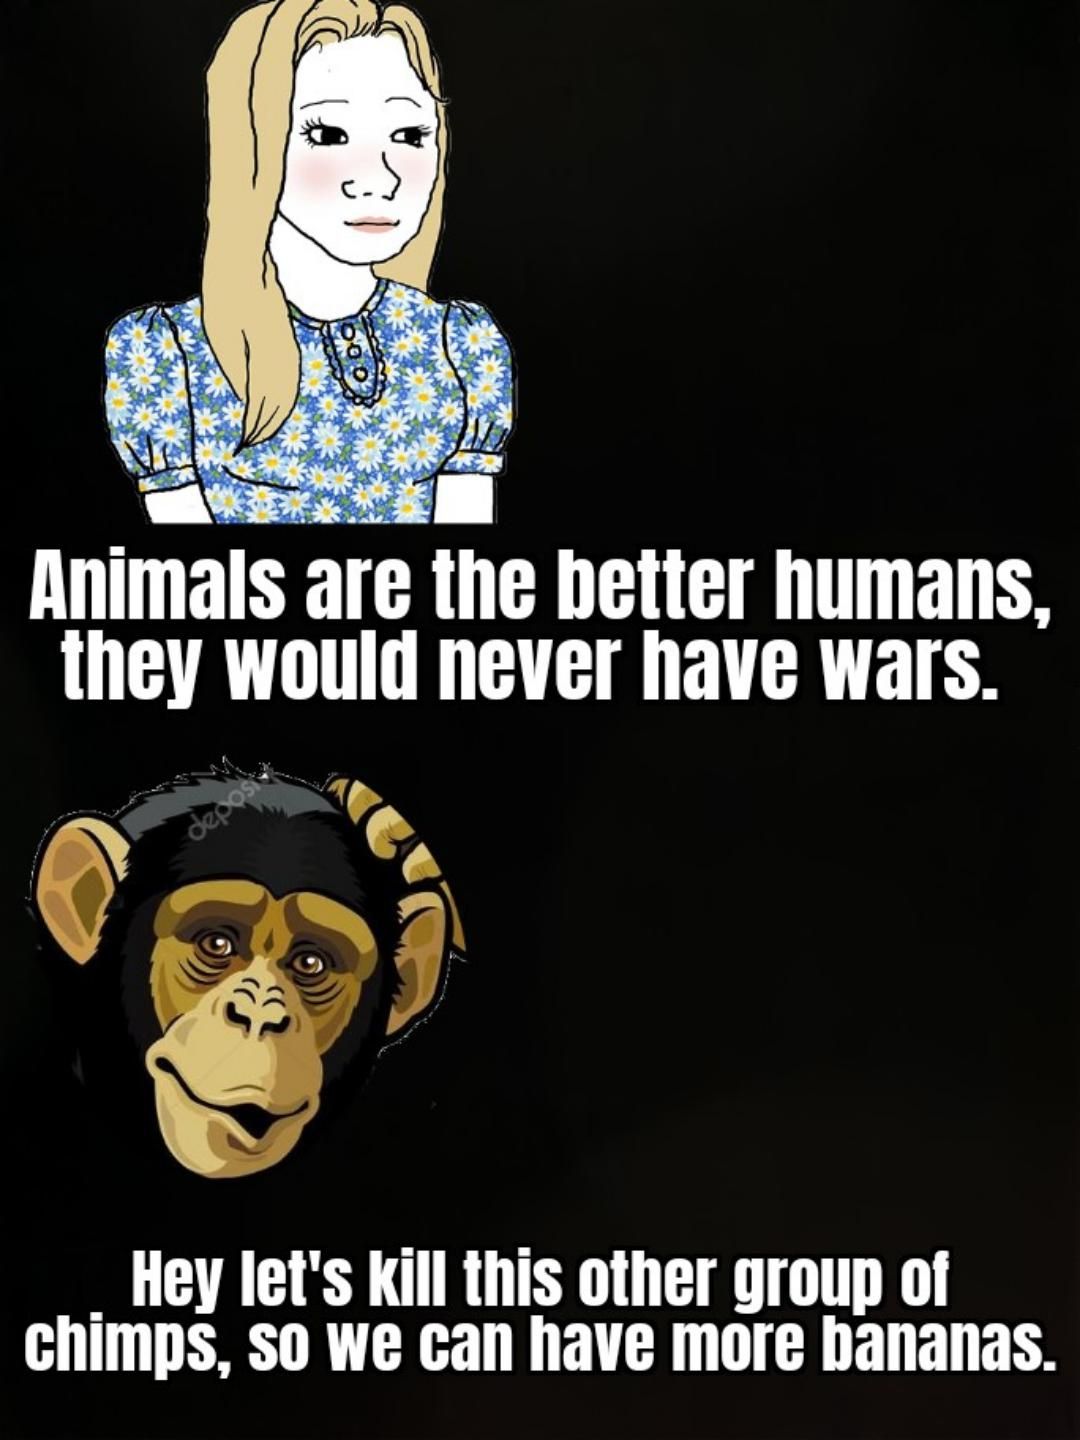 chimpanzees are no better than humans